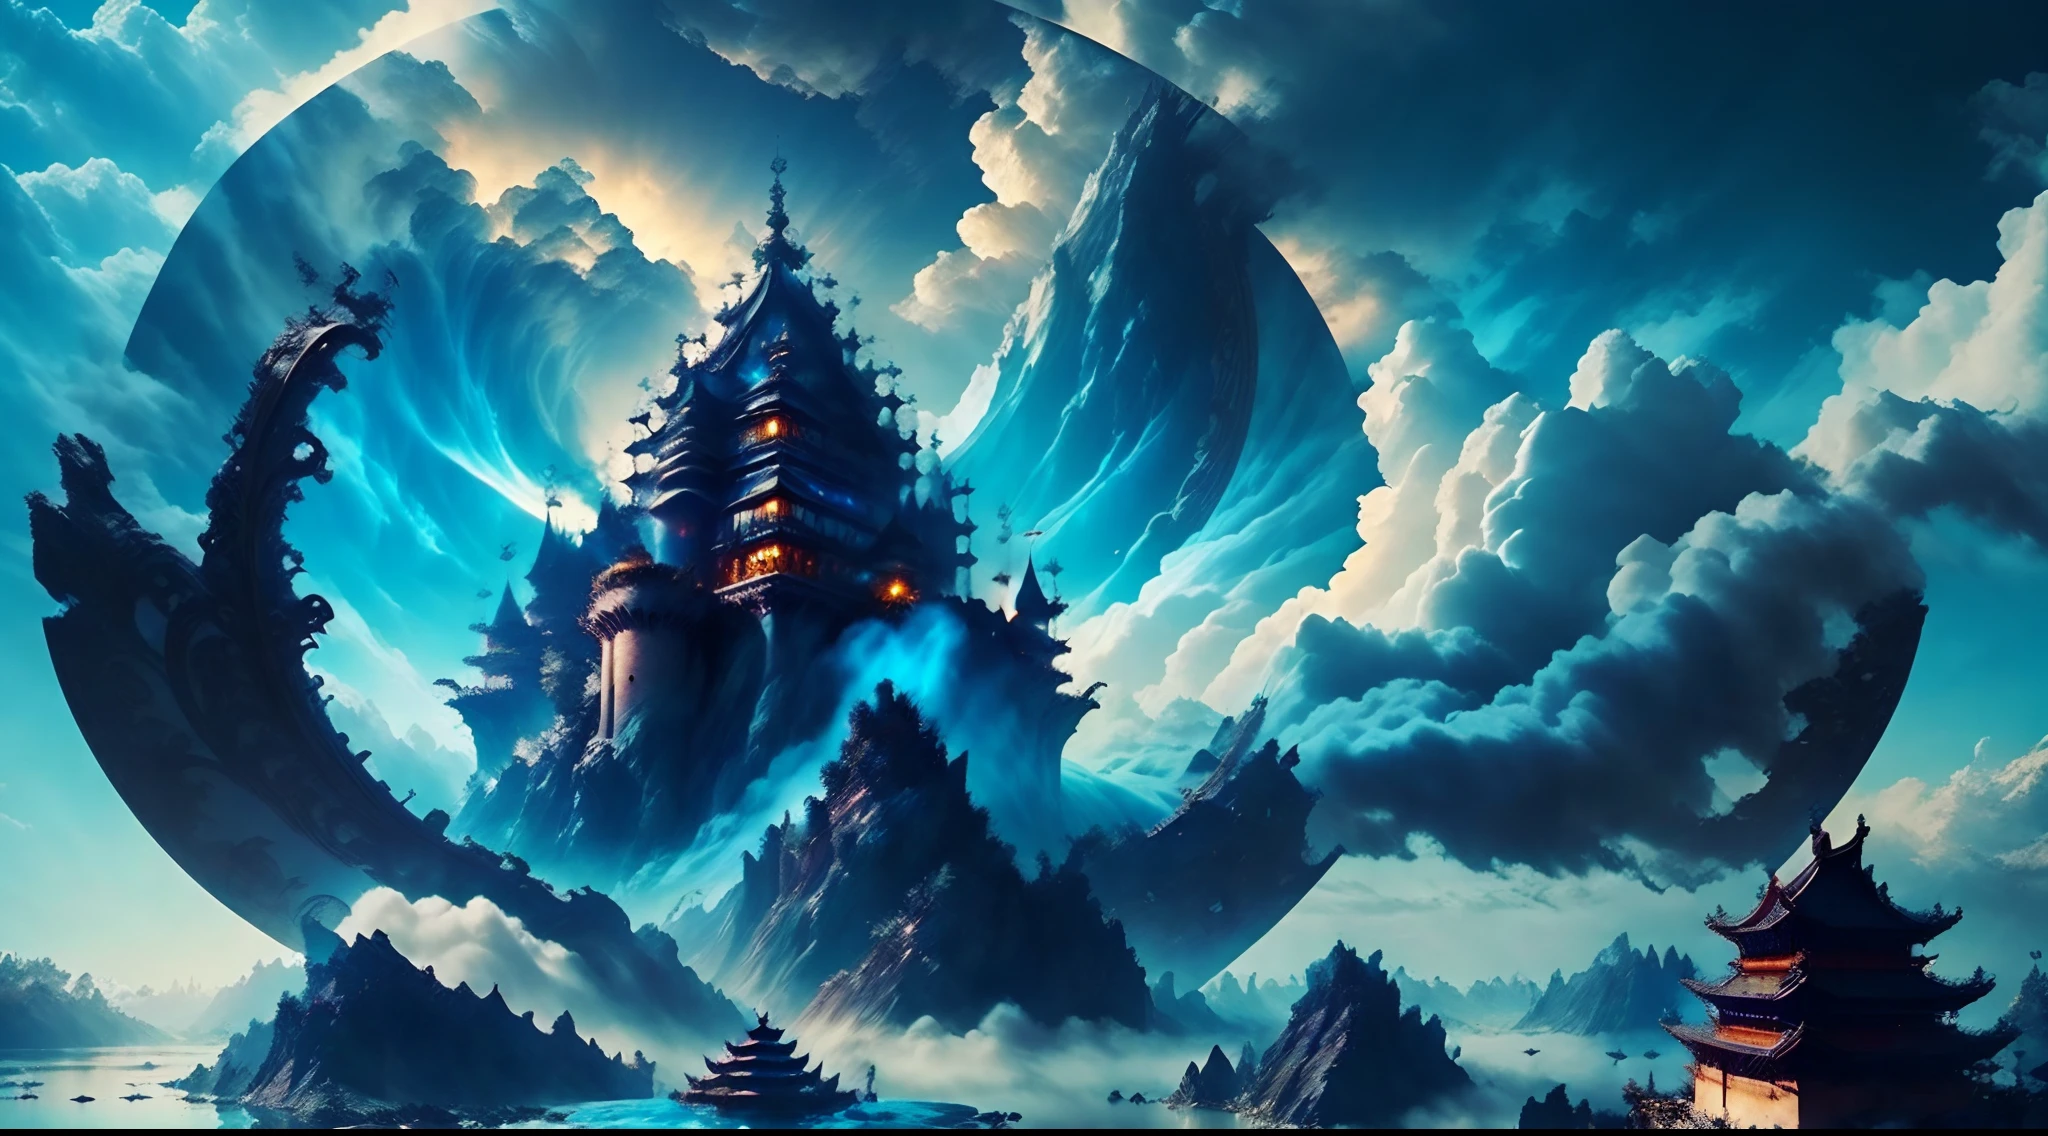 An immortal realm, a beautiful castle in the sky, a beautiful blue lake, people flying in the sky, flying swords, people dressed in battle robes, cloudy sky, floating castle in the middle of the clouds, chinese style castle